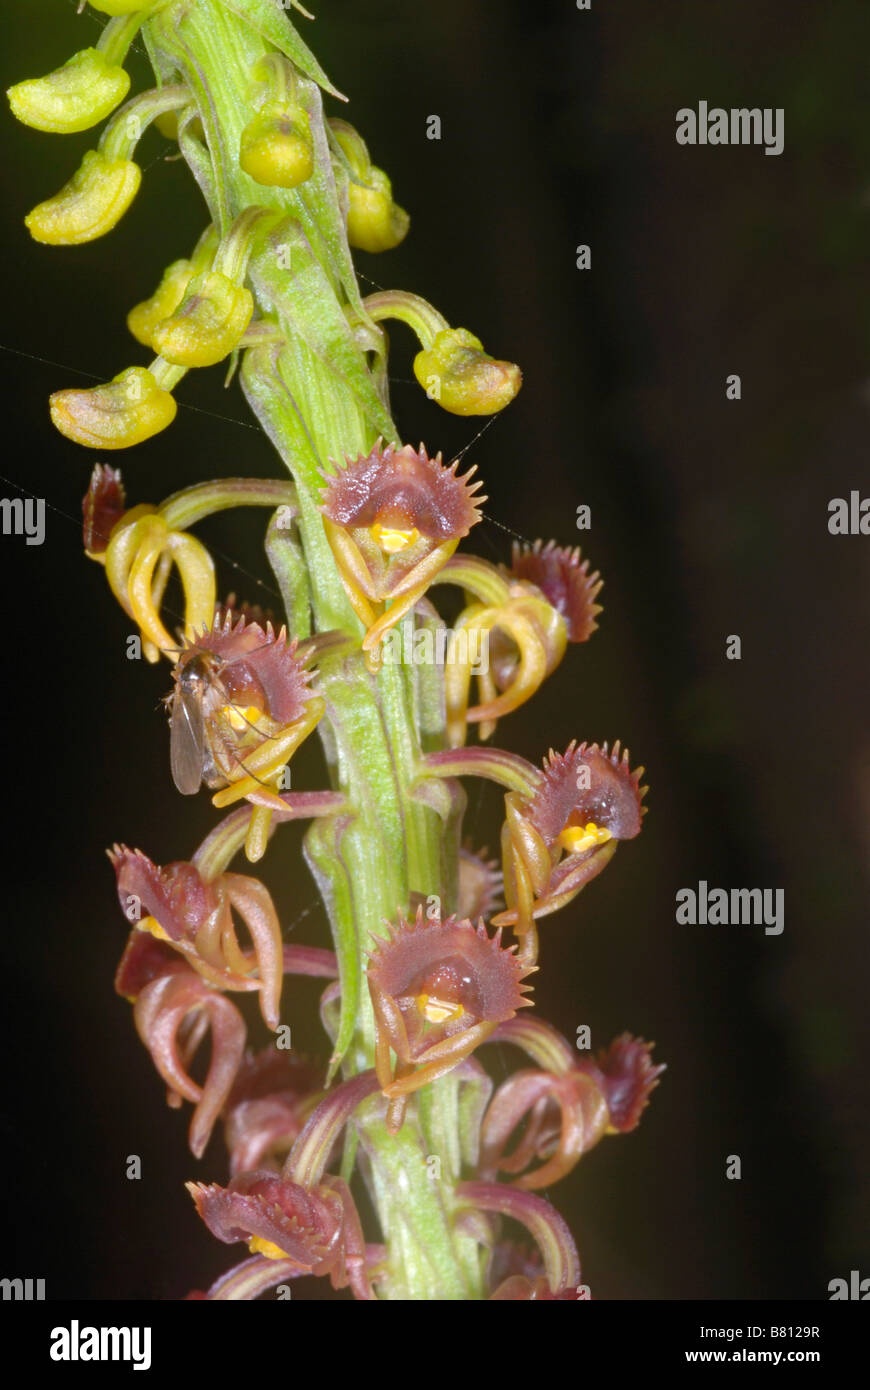 Flowers of a ground orchid. Malaxis rheedii grows on shady laterite boulders and flowers during the rainy season. Stock Photo